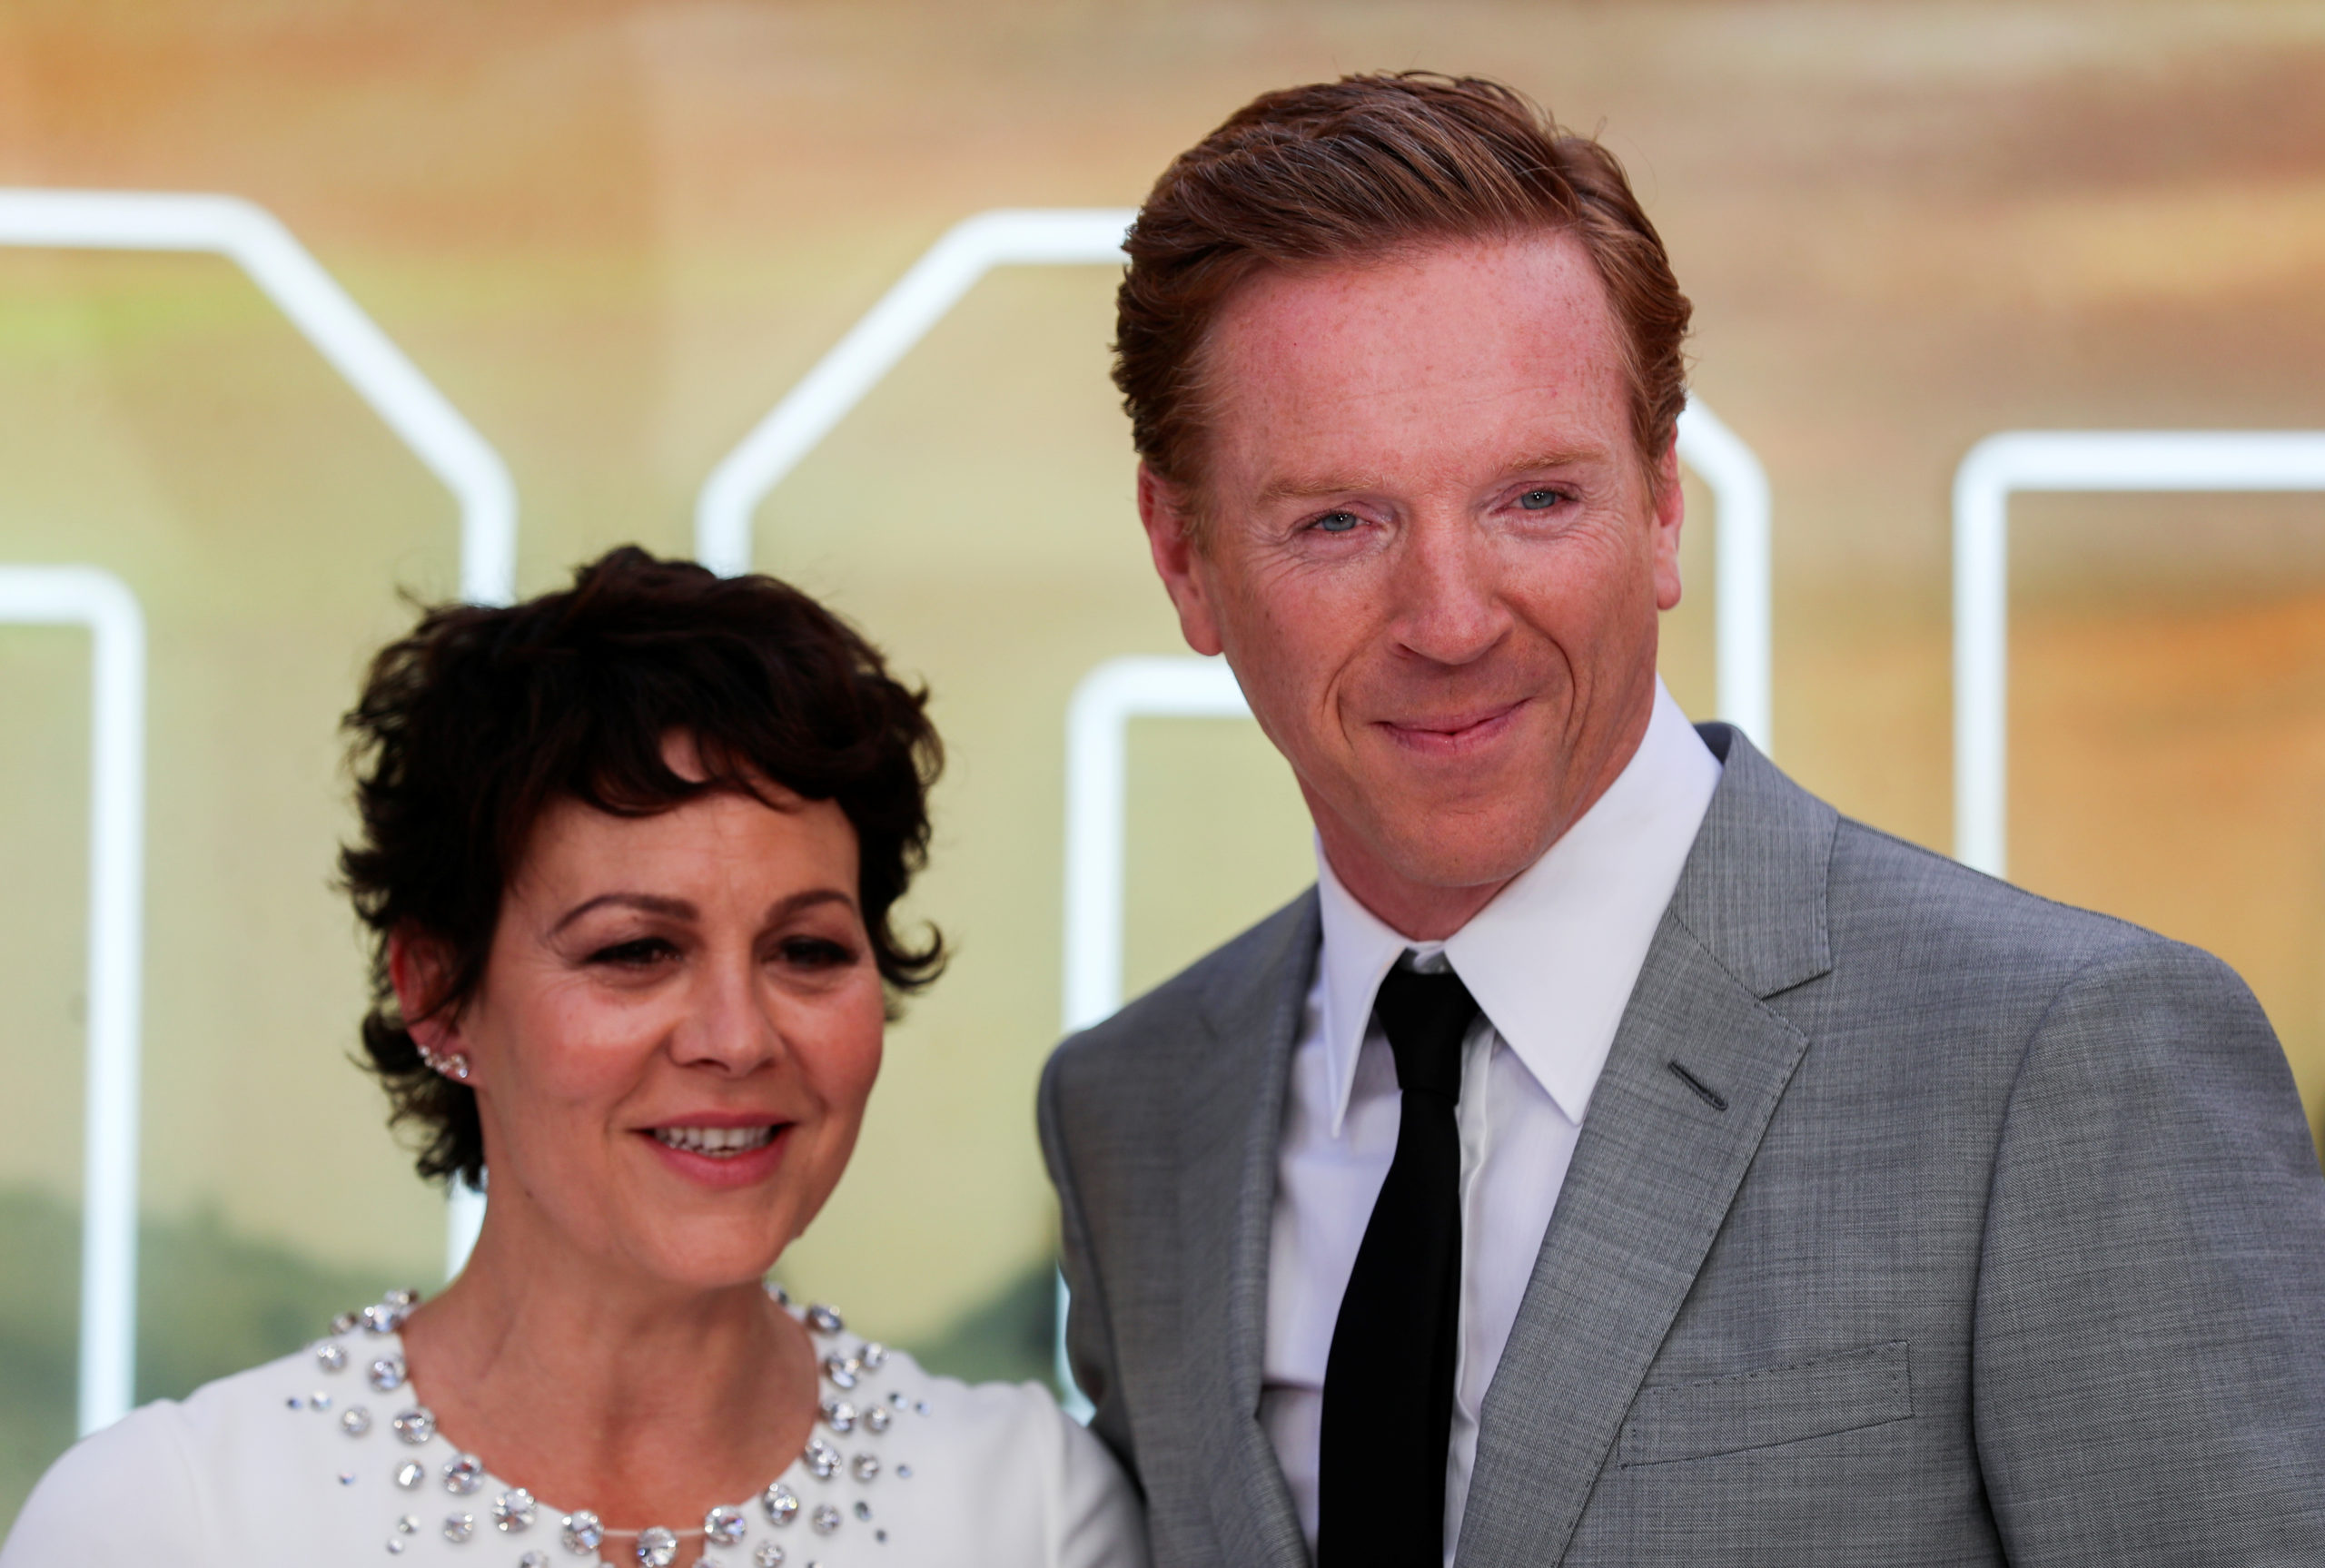 Actor Damian Lewis and his wife Helen McCrory pose as they arrive for the London premiere of "Once Upon a Time in Hollywood", in London, Britain July 30, 2019. REUTERS/Simon Dawson